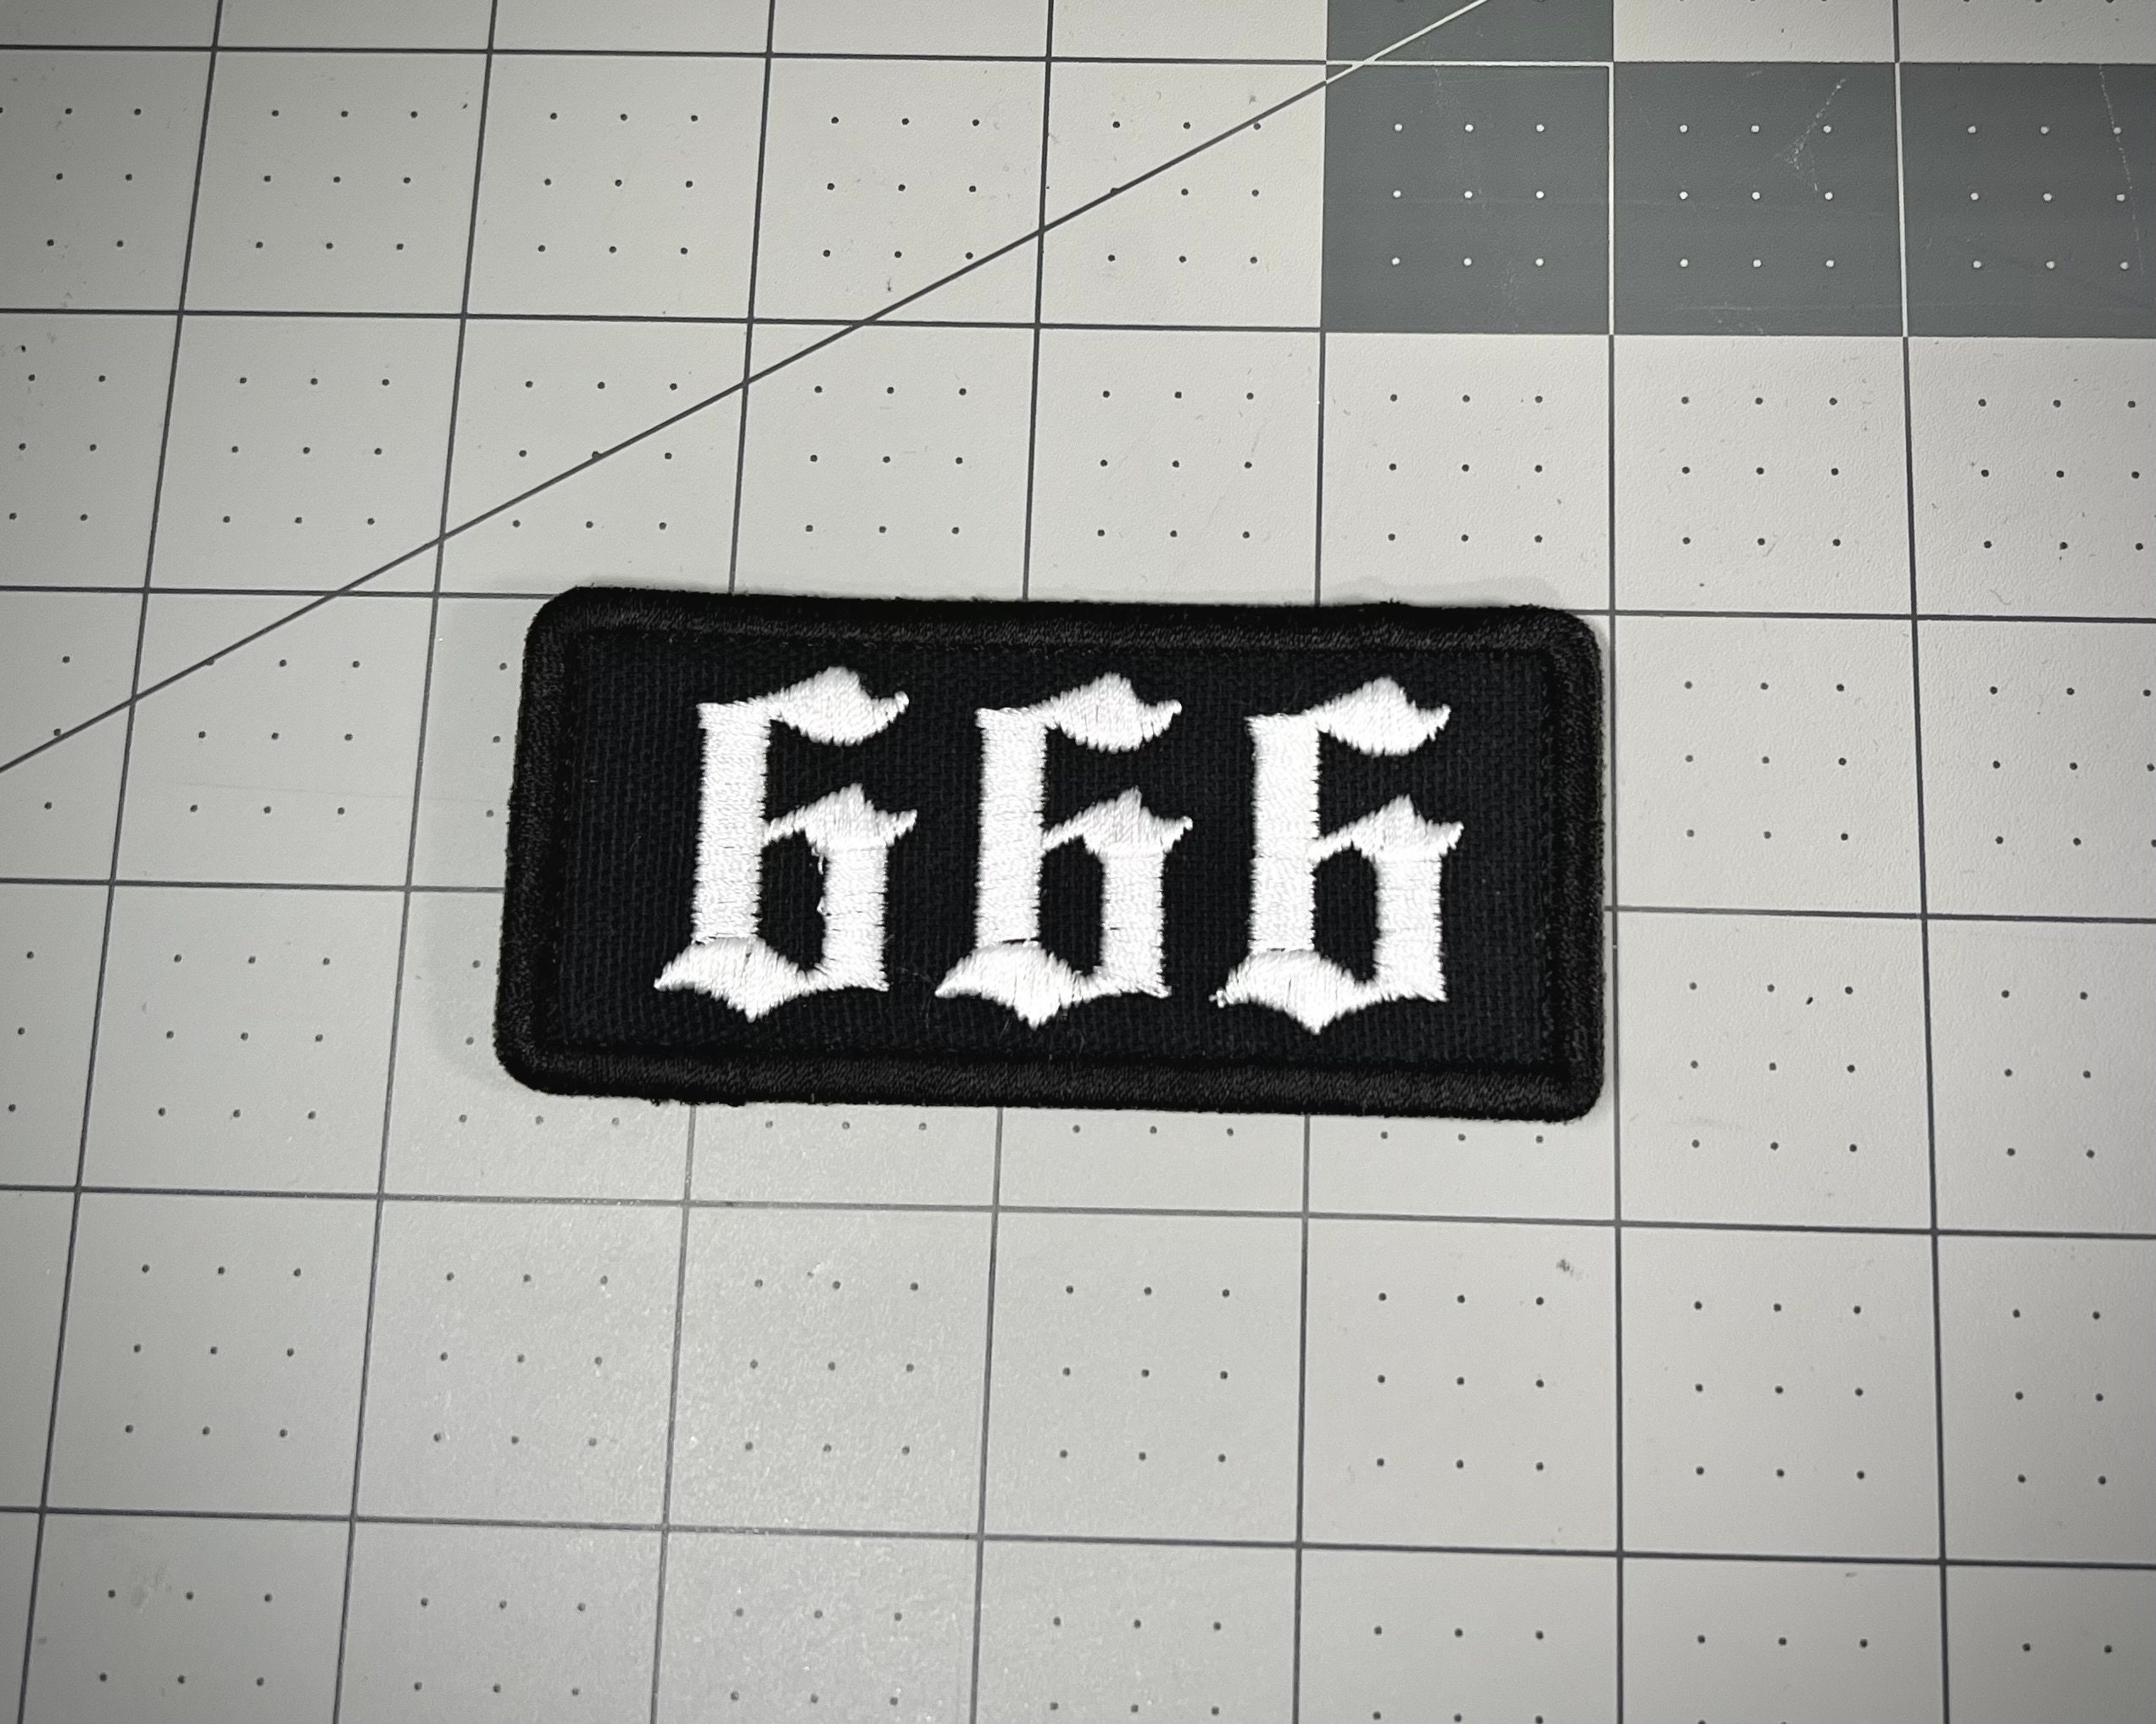 Kreepsville 666 Arch 666% Evil Patch Horror Embroidered On Iron